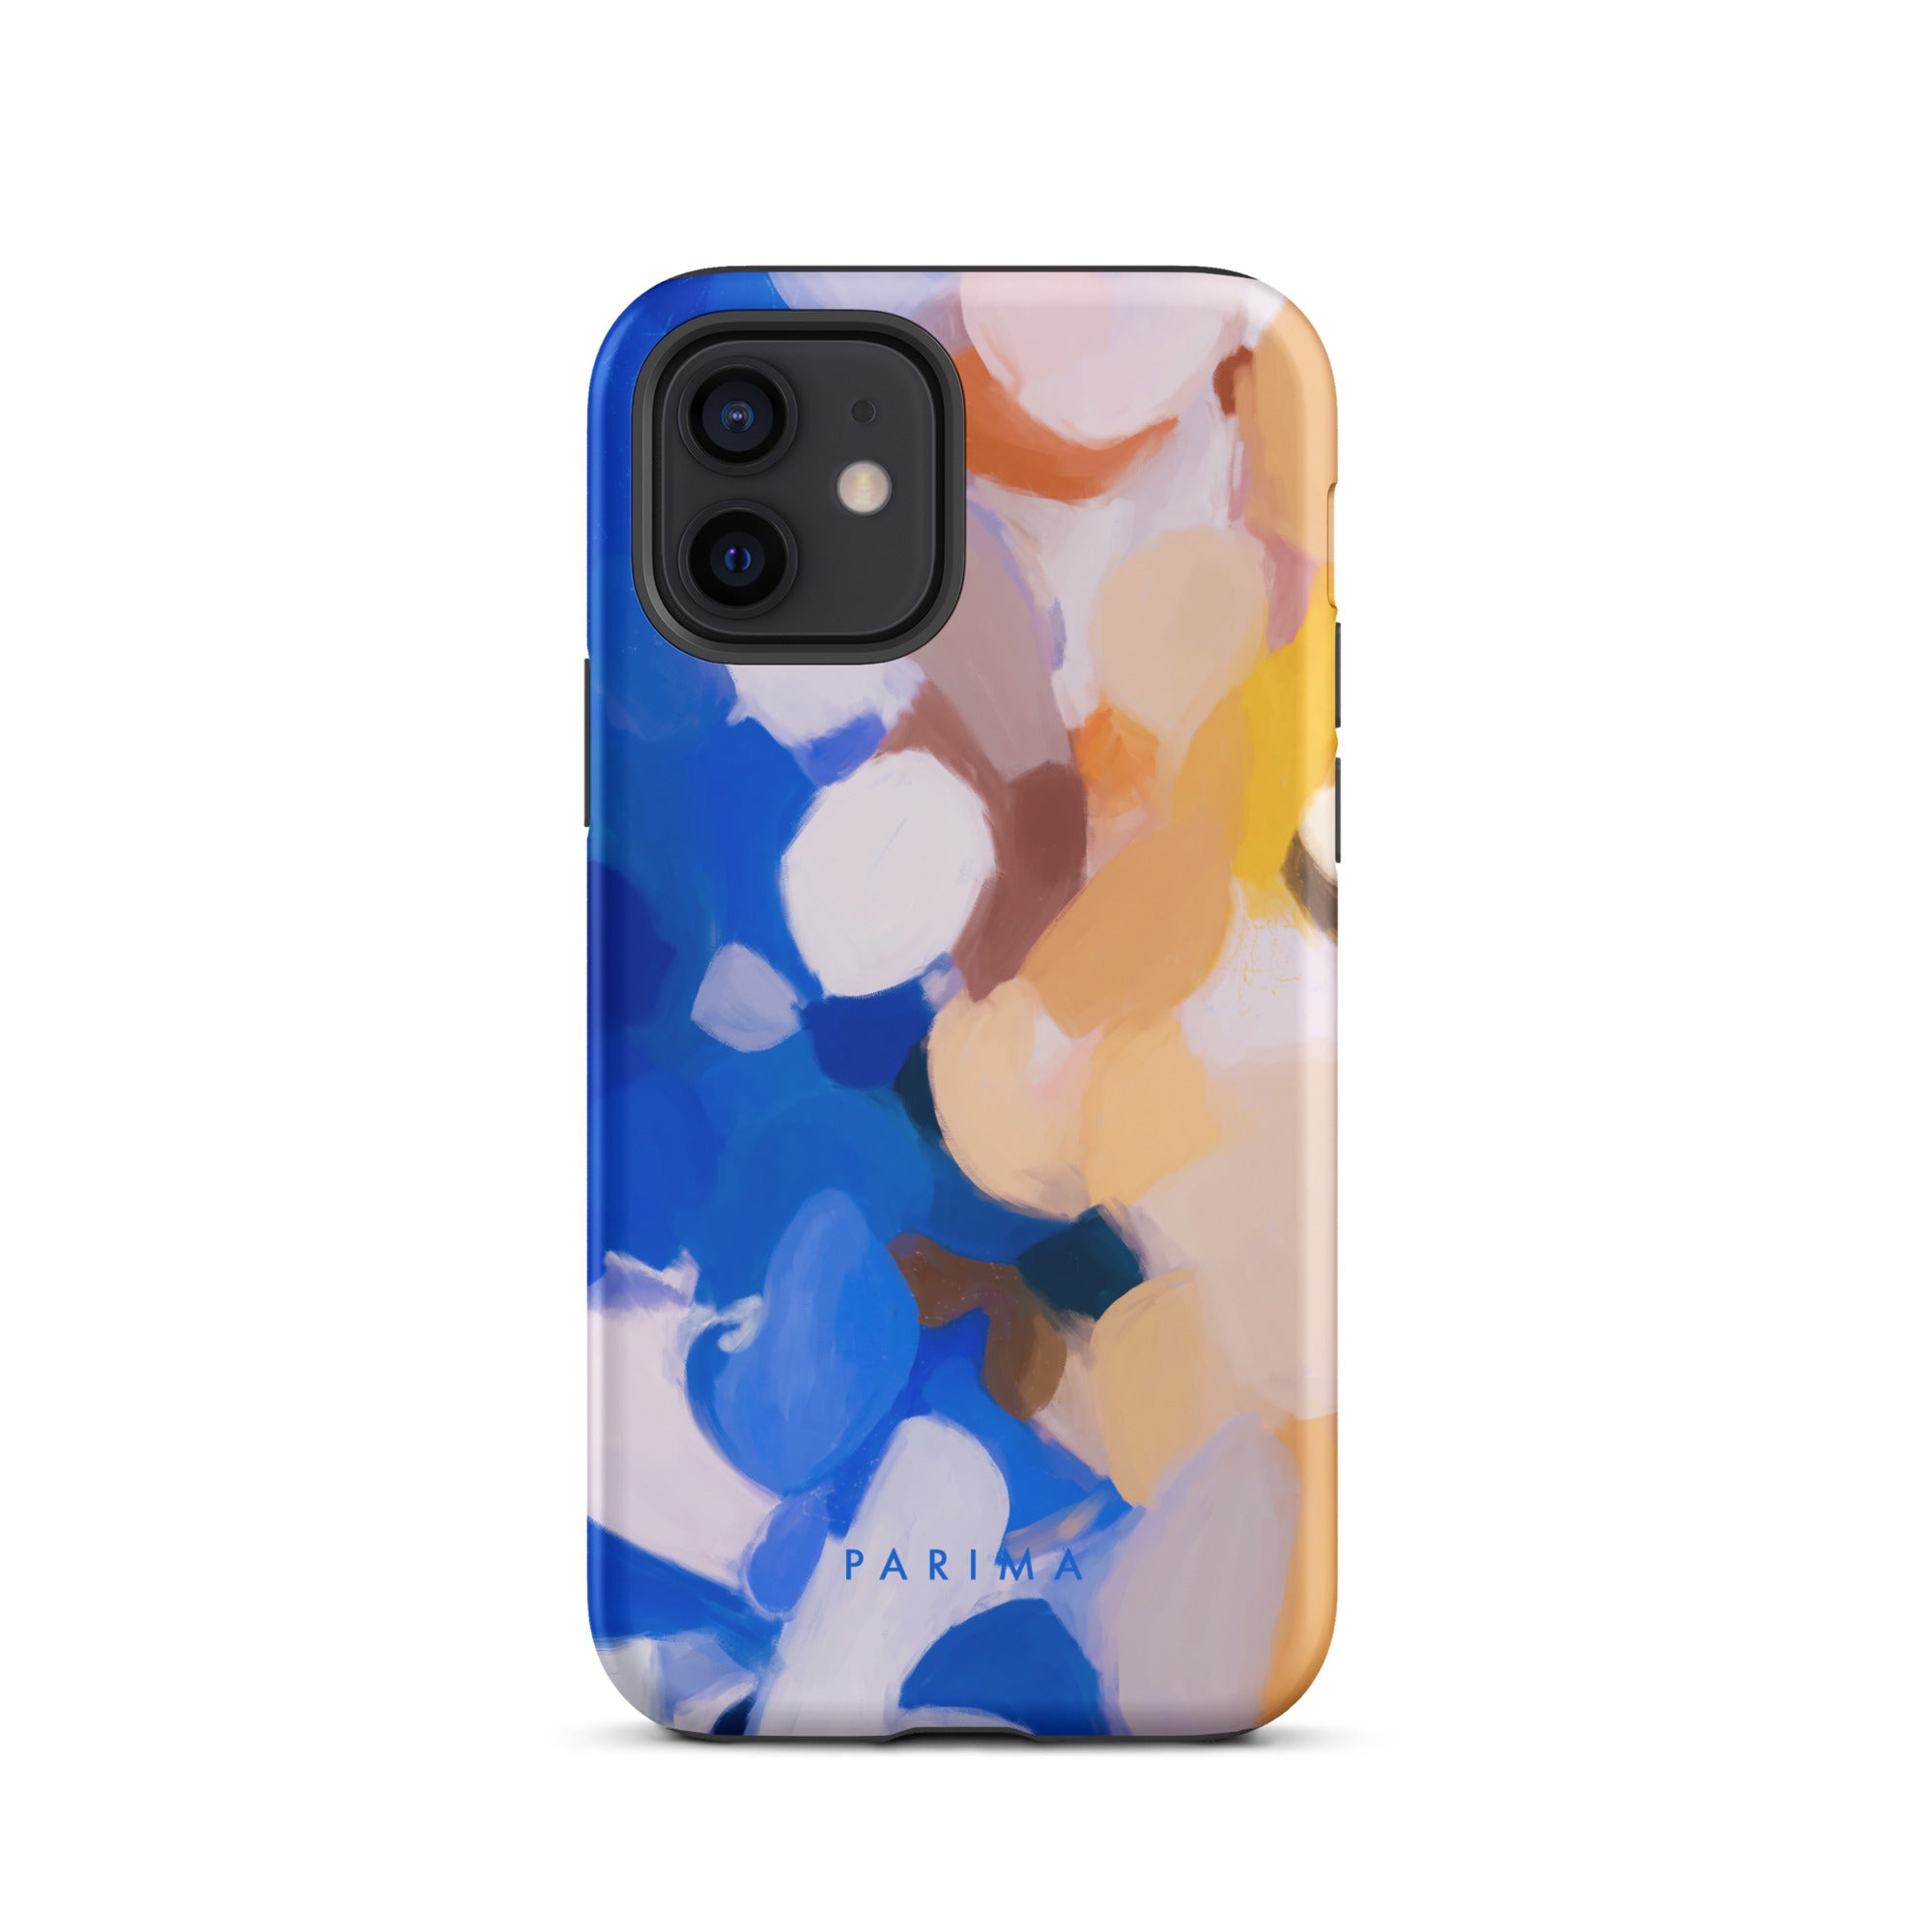 Bluebell, blue and yellow abstract art - iPhone 12 tough case by Parima Studio